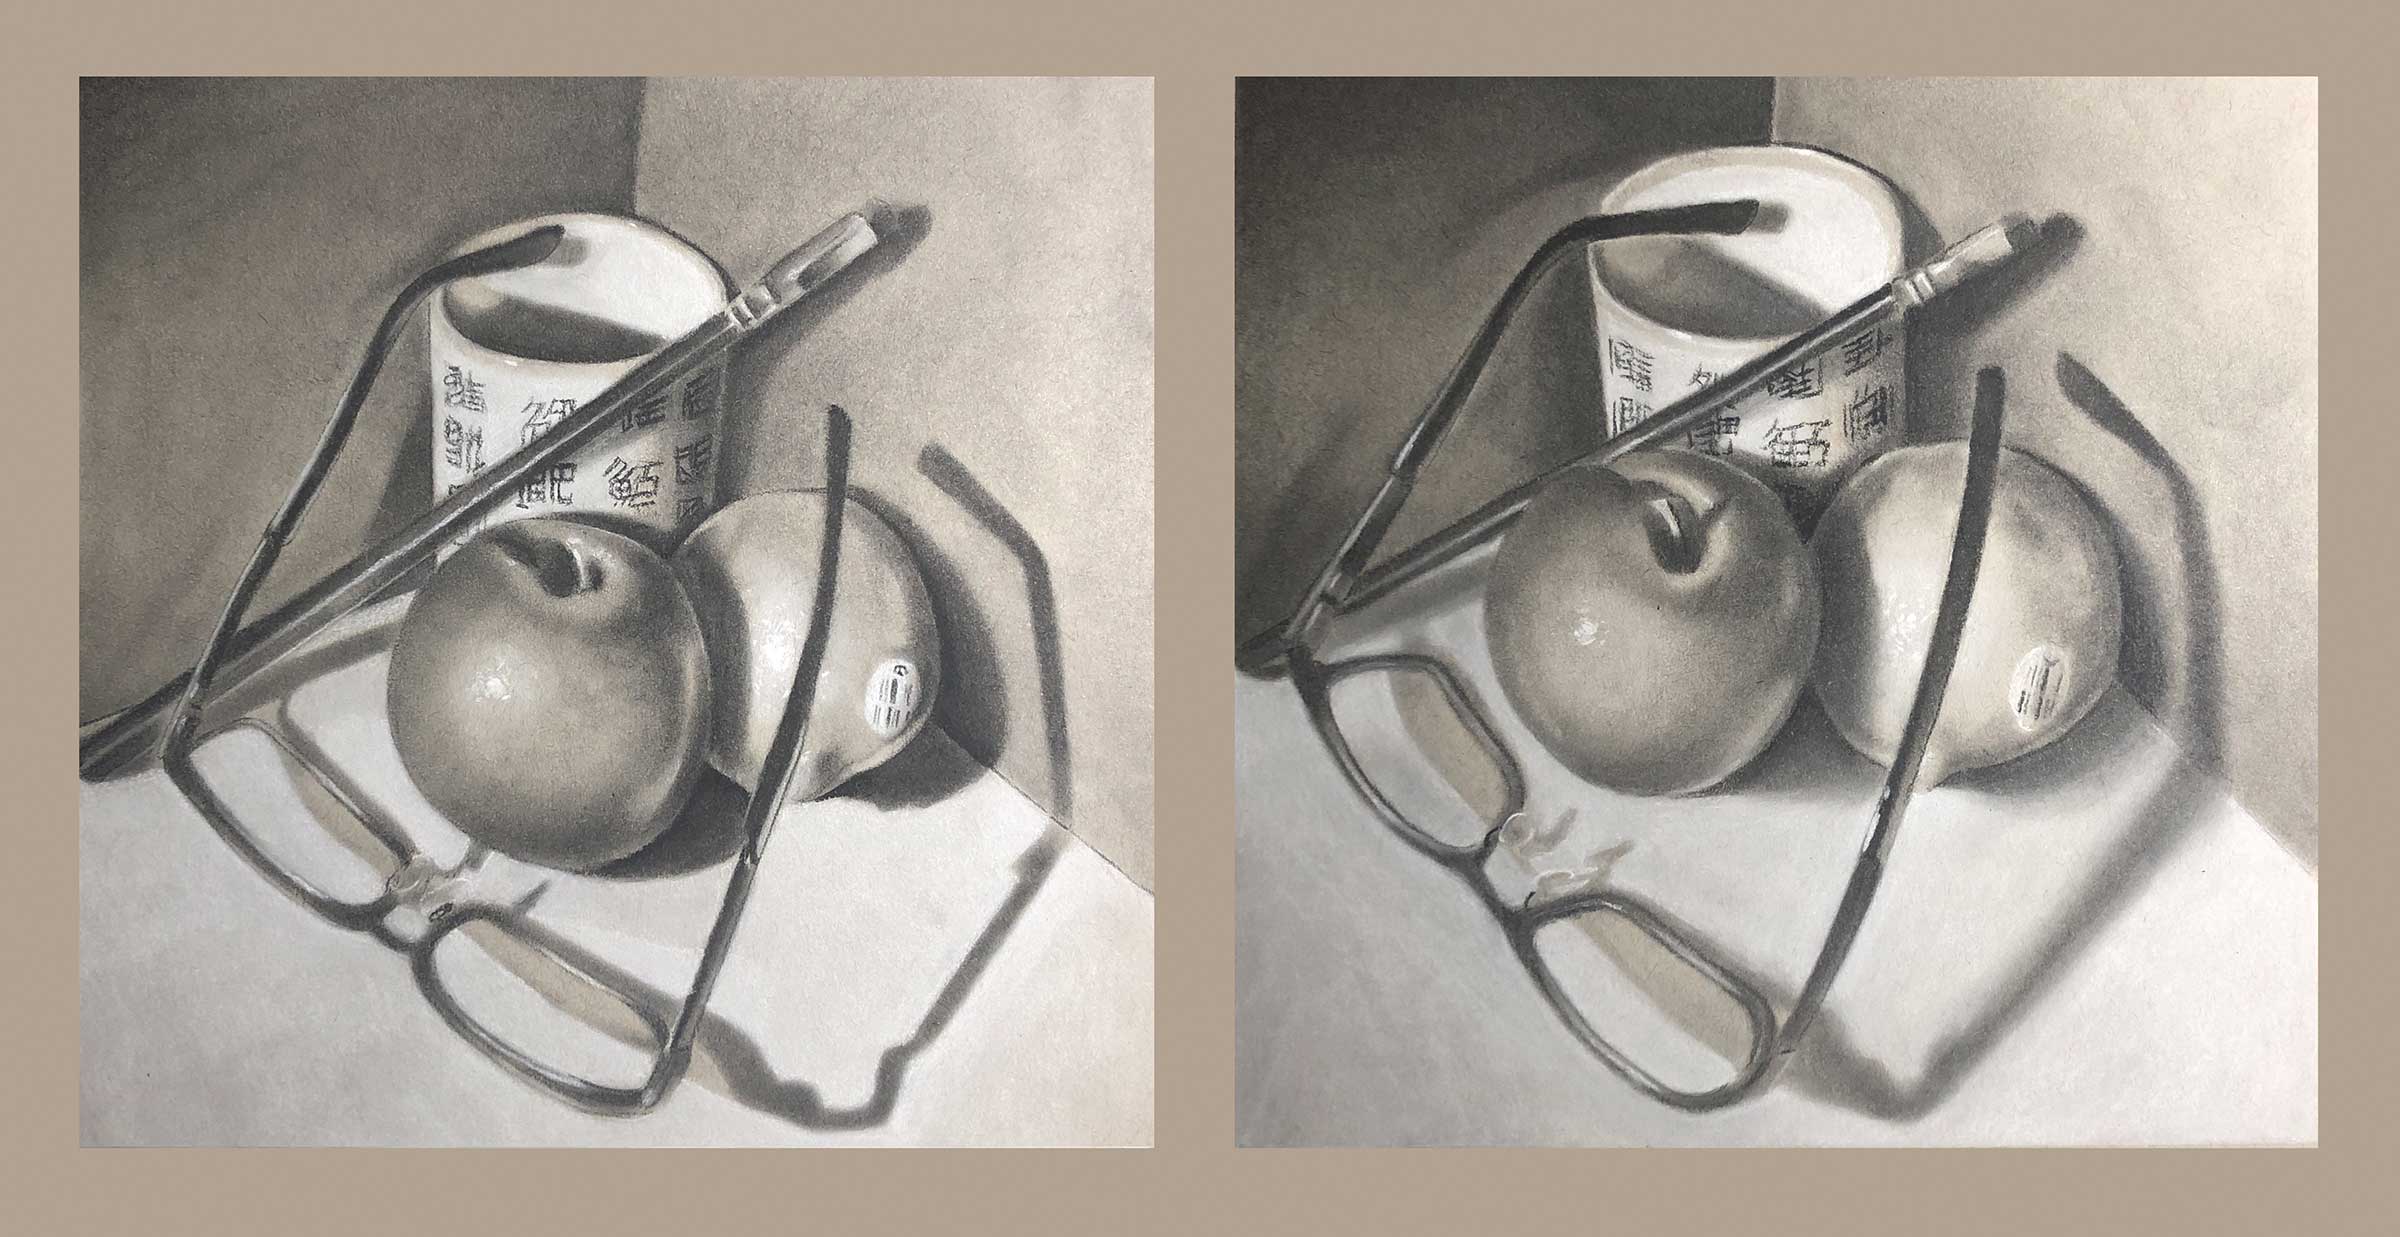 Objects including fruit, a brush, a pair of glasses, and a mug.